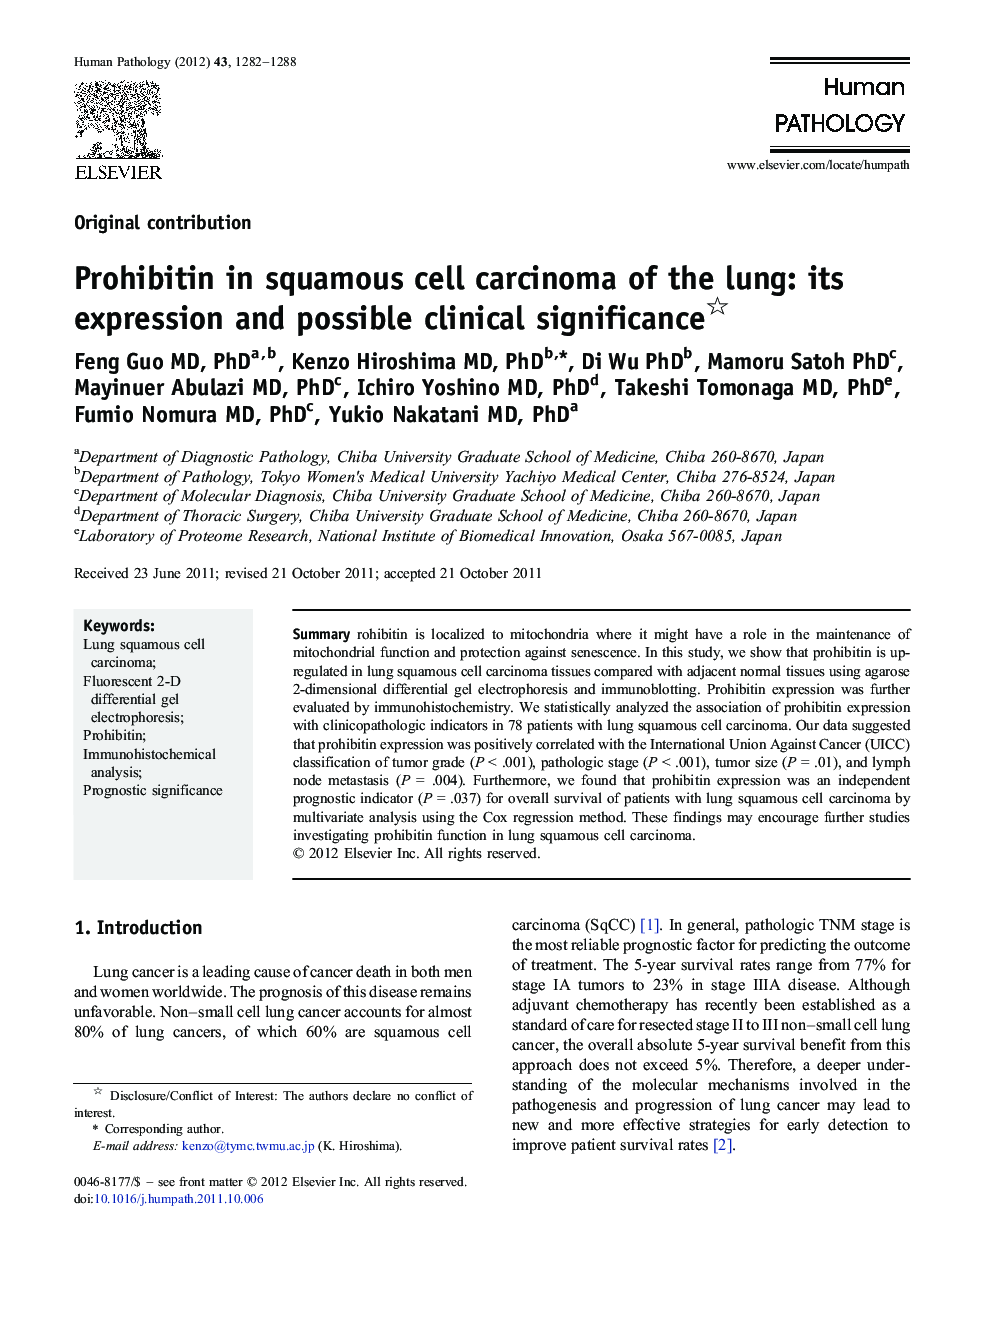 Prohibitin in squamous cell carcinoma of the lung: its expression and possible clinical significance 